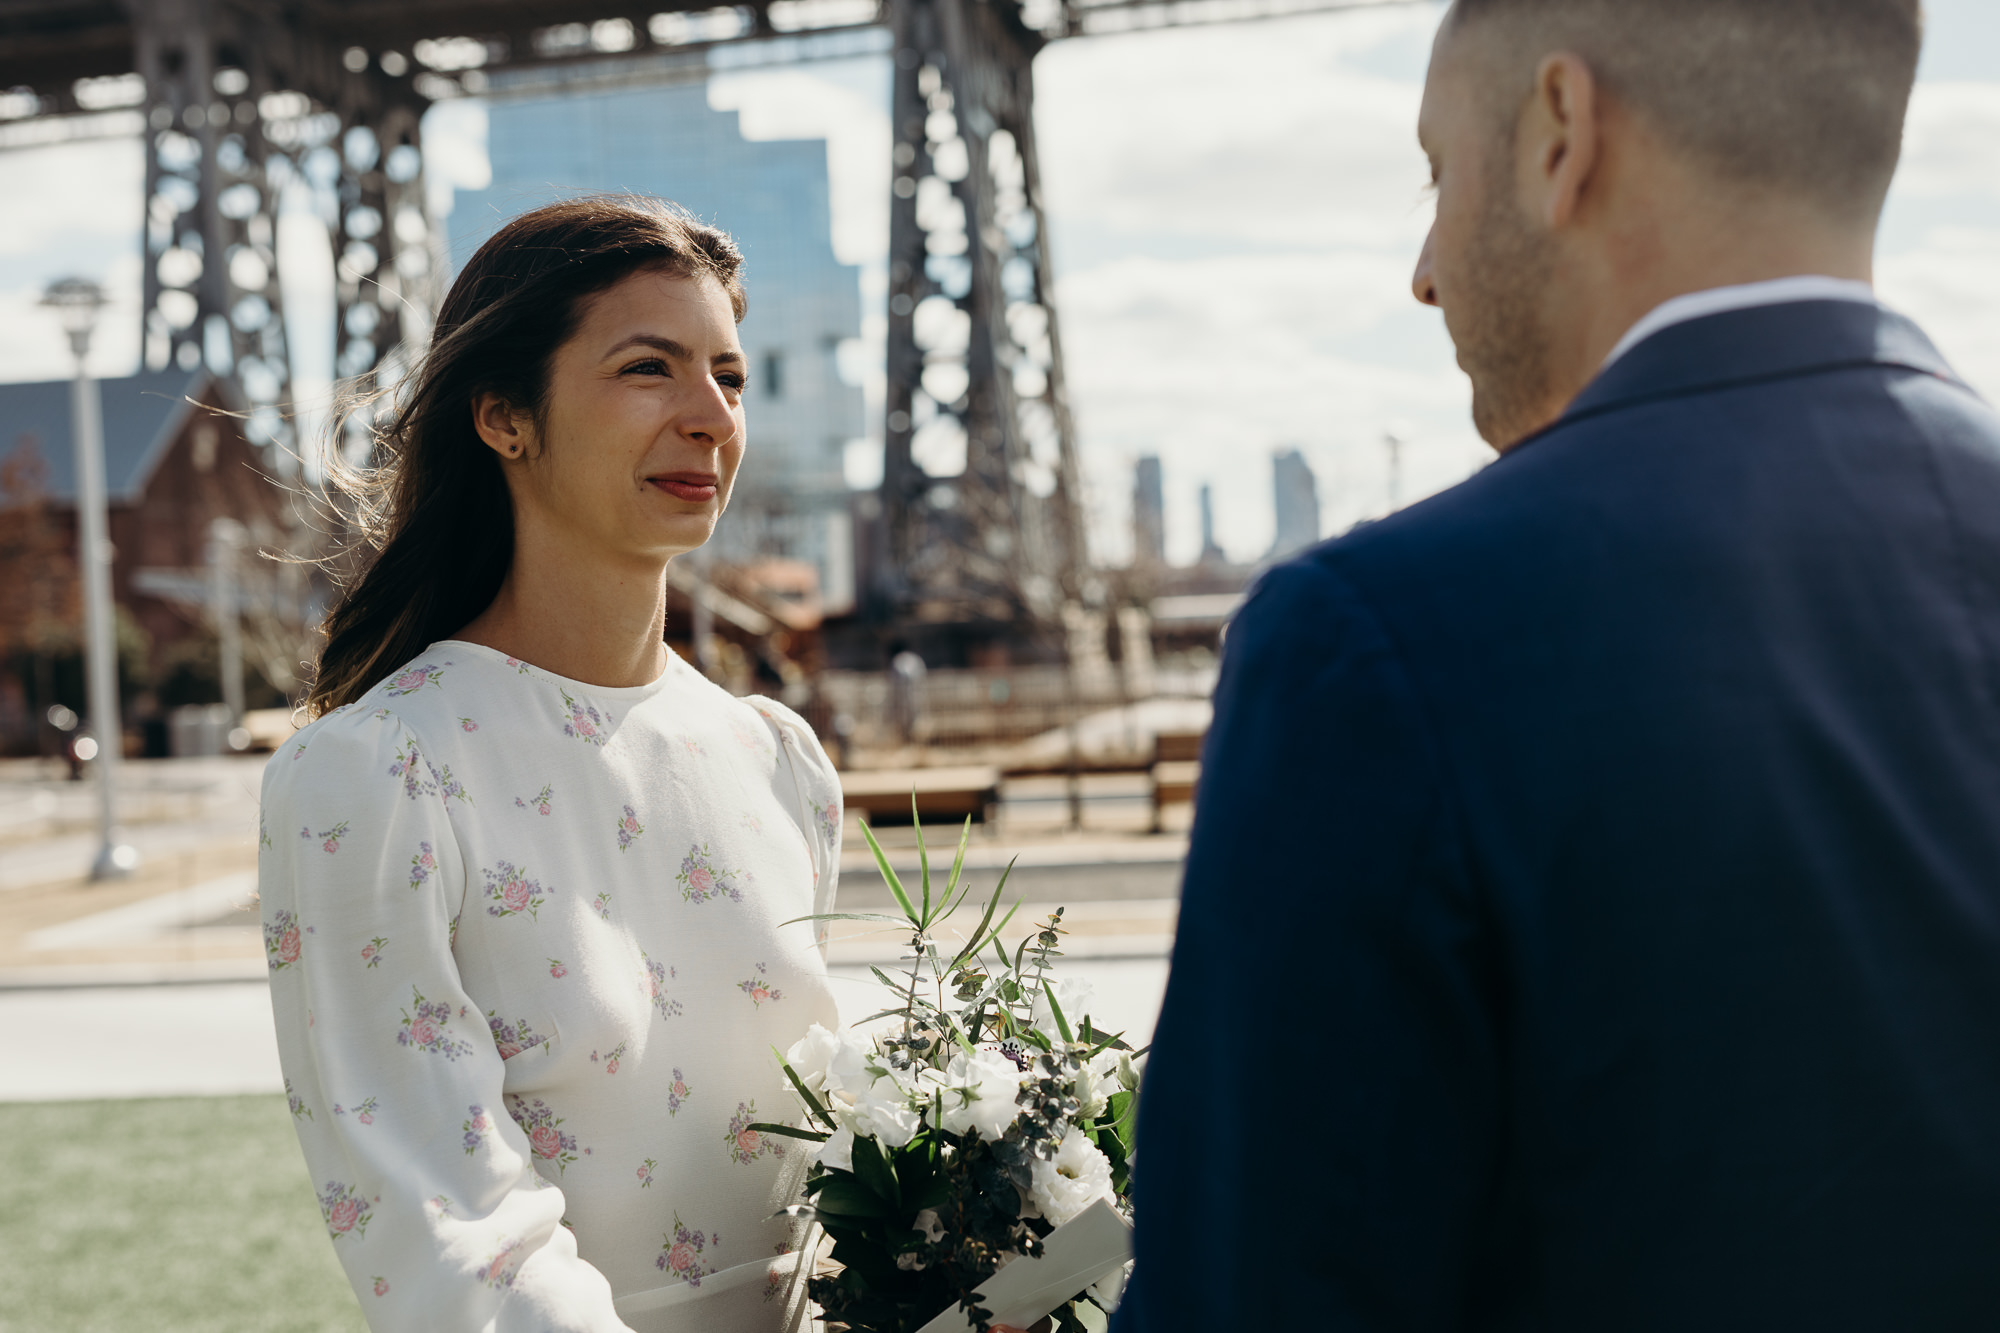 bride and groom during their wedding ceremony at domino park in brooklyn, ny